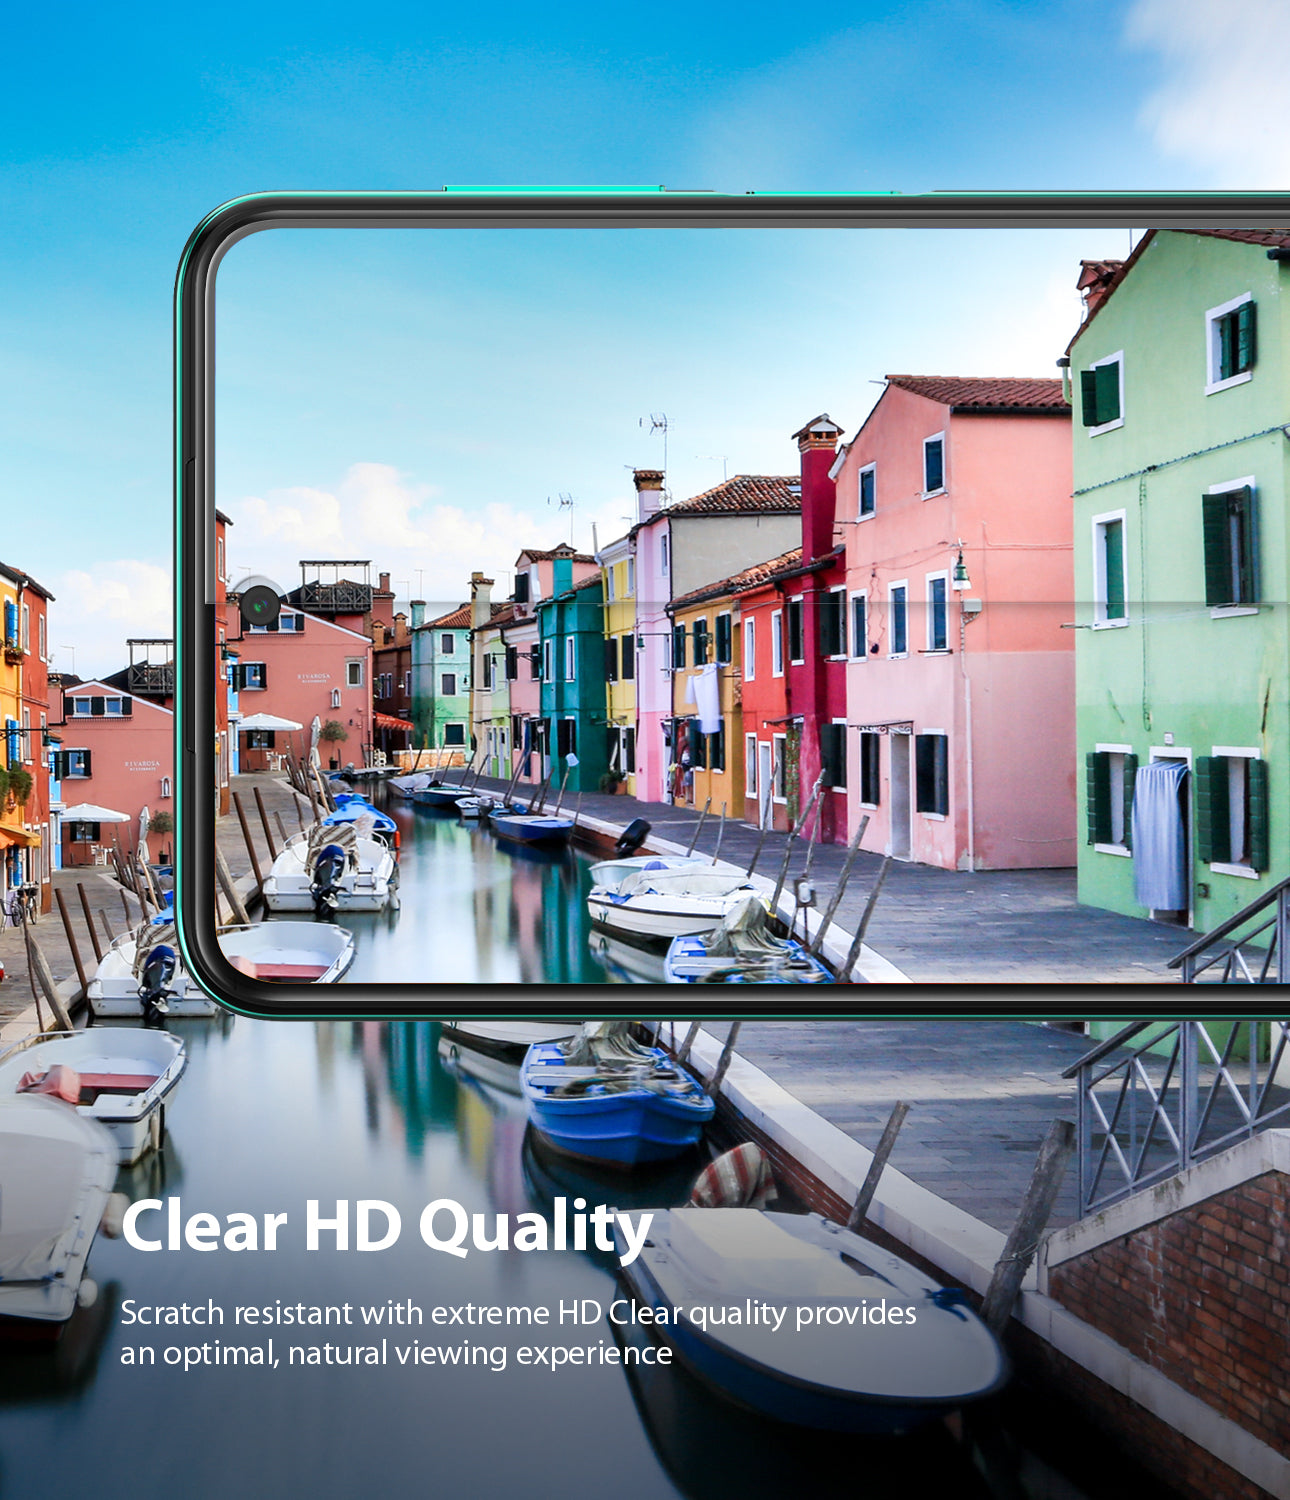 clear hd quality with scratch resistant 